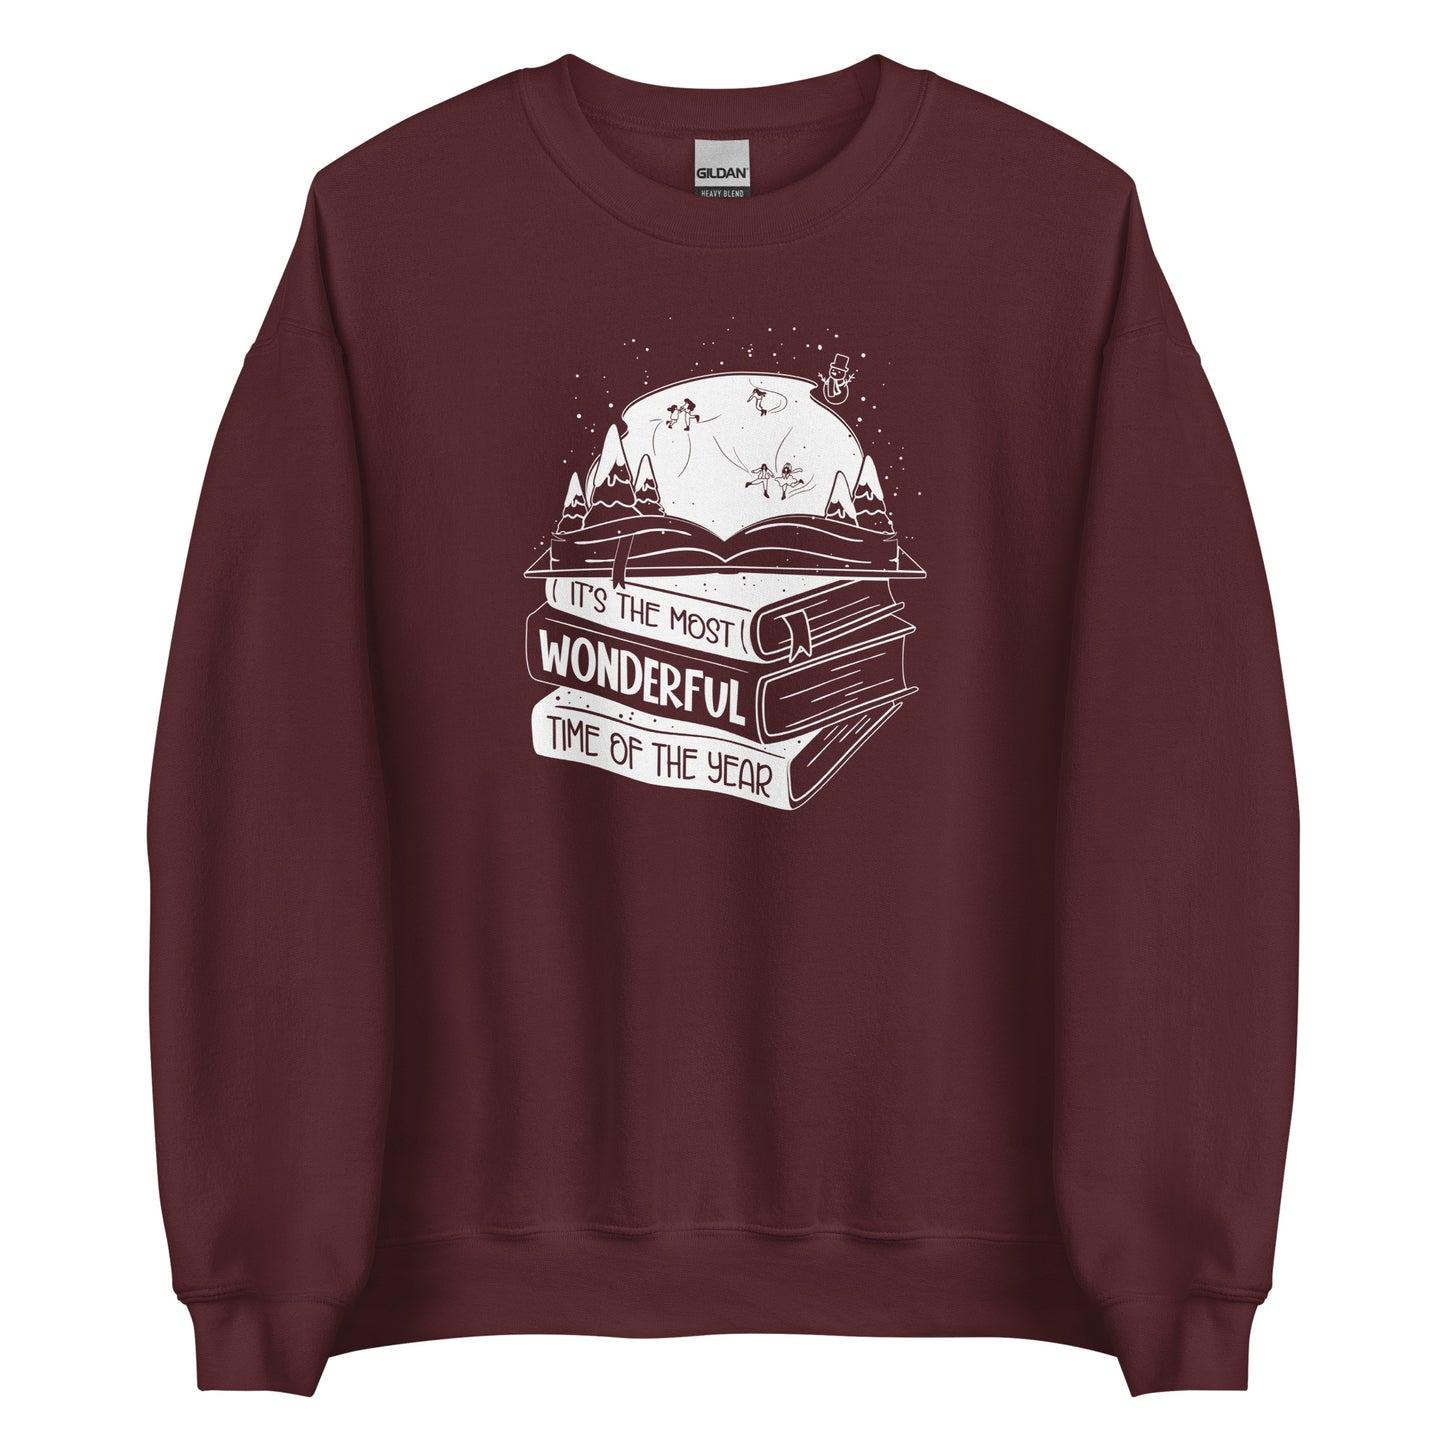 it's the most wonderful time of the year sweatshirt